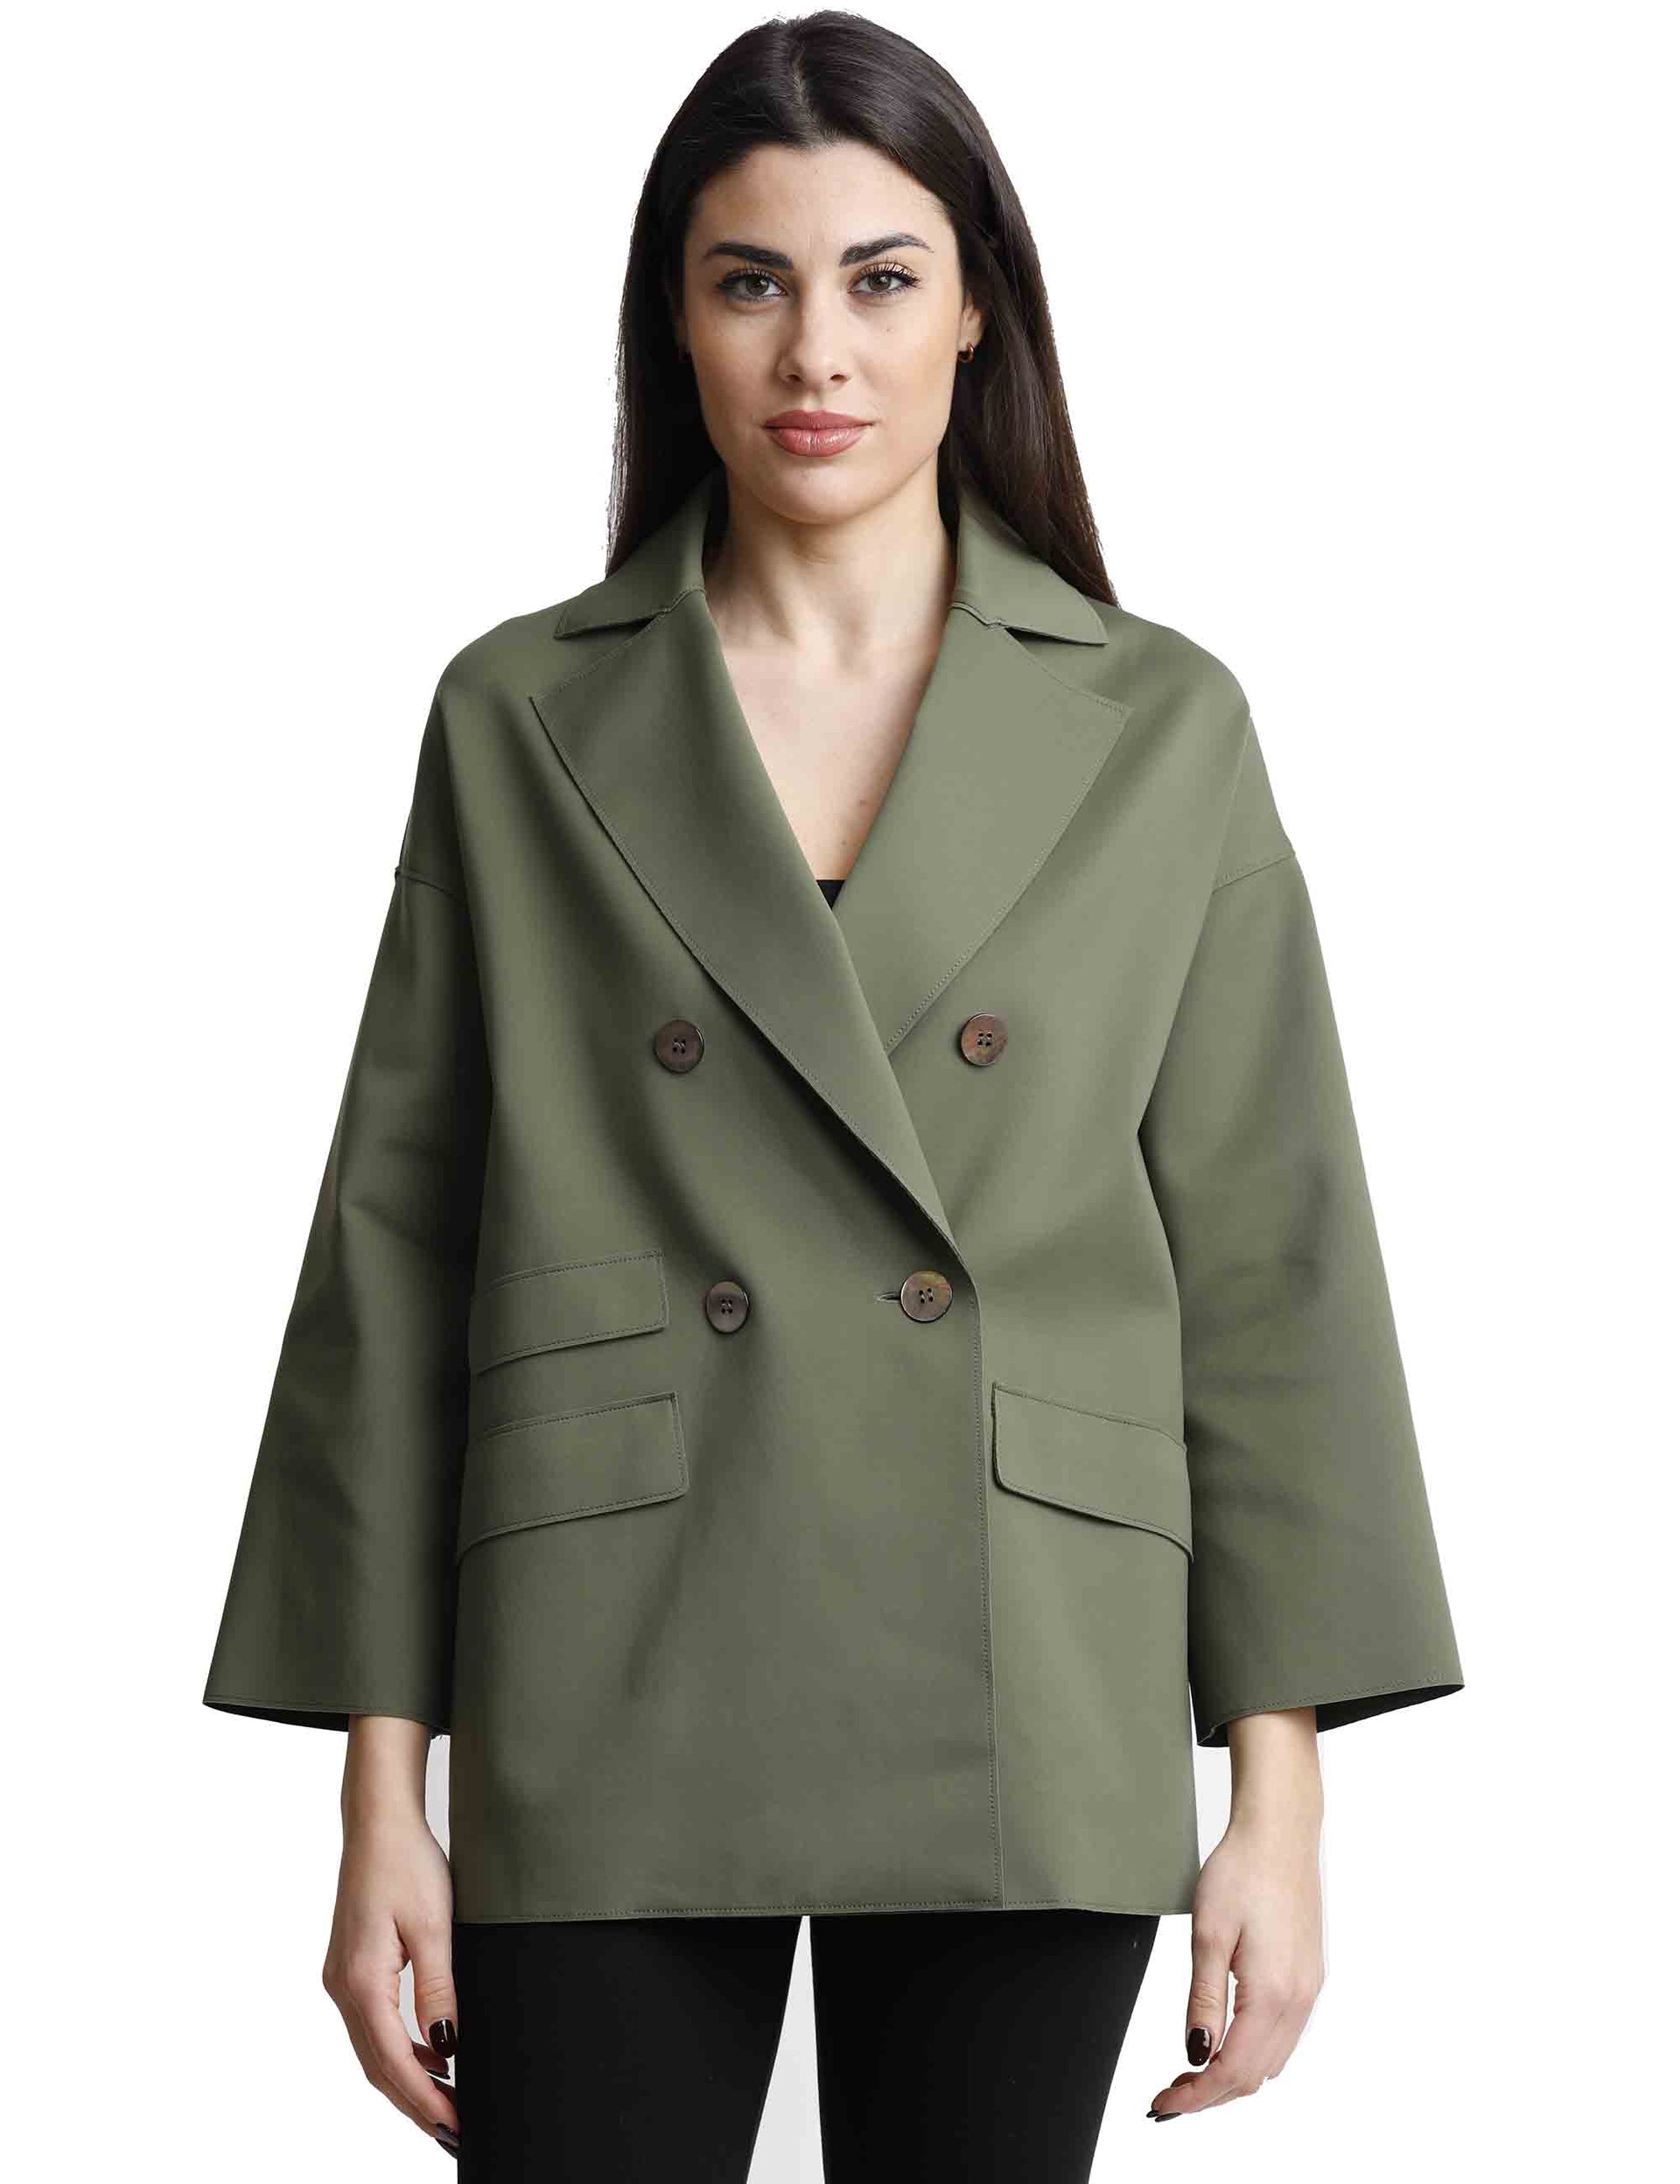 Sole women's double-breasted jackets in green fabric with long sleeves